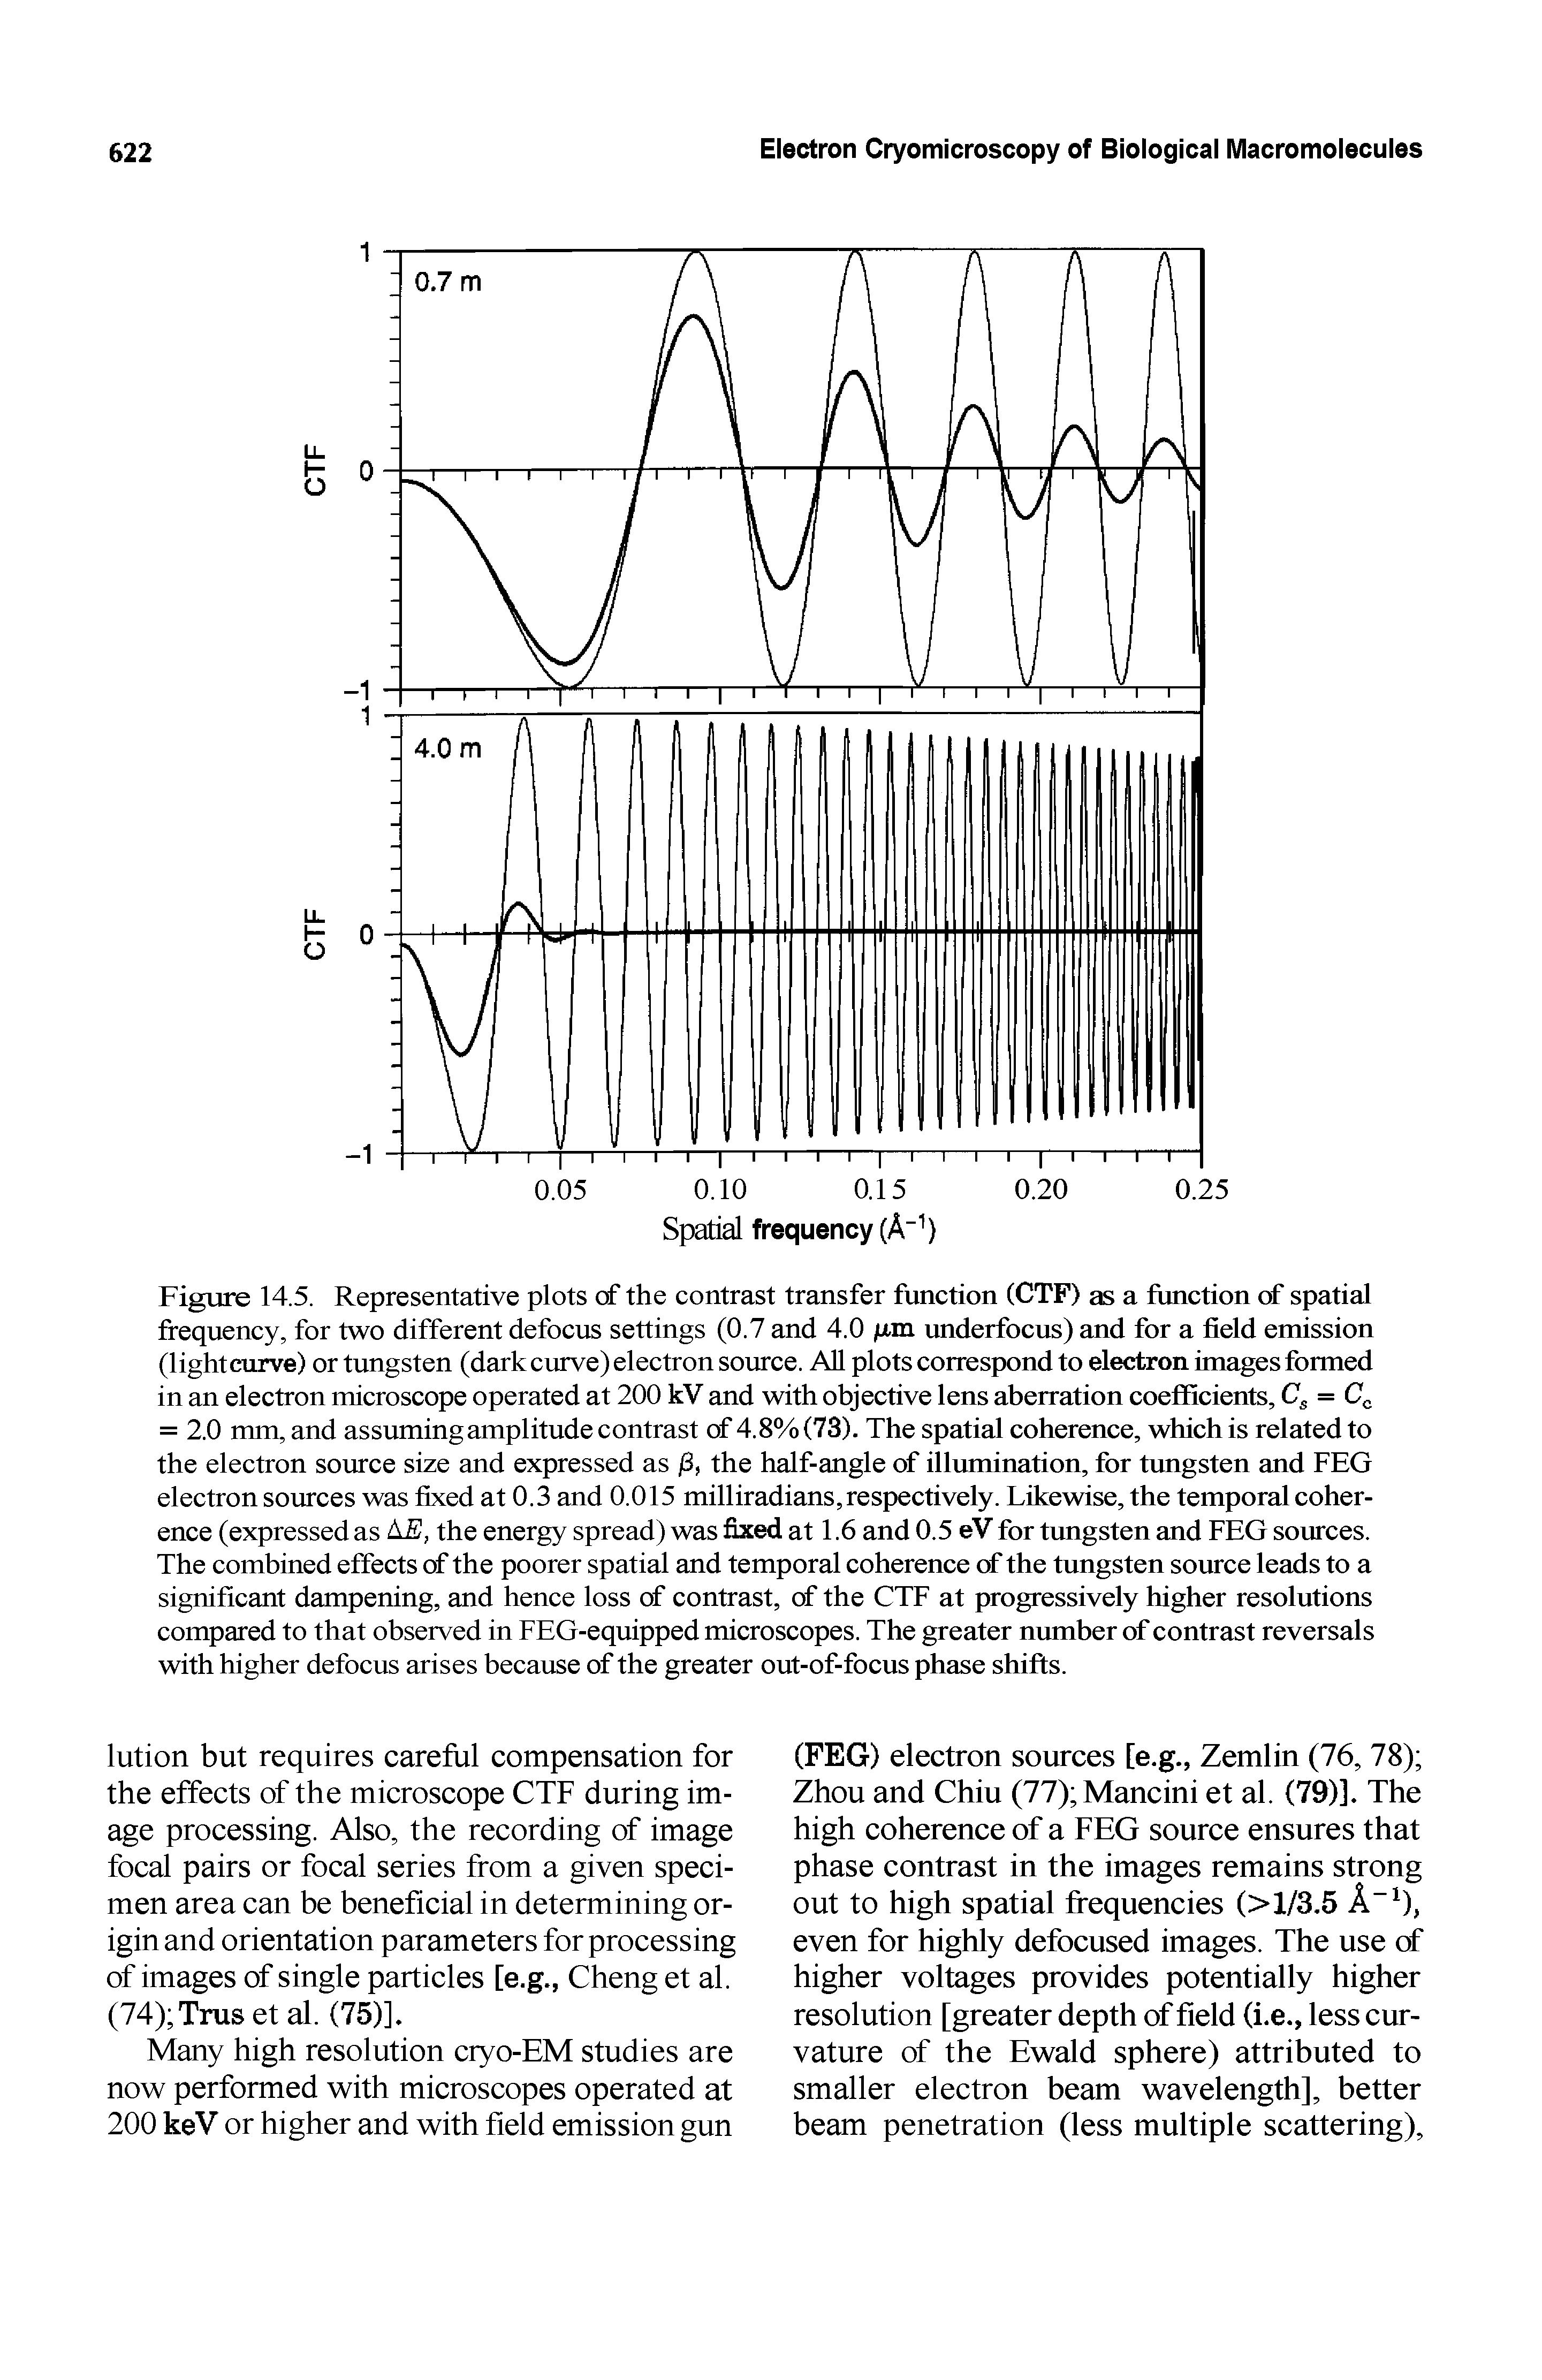 Figure 14.5. Representative plots of the contrast transfer function (CTF) as a function of spatial frequency, for two different defocus settings (0.7 and 4.0 fxm underfocus) and for a field emission (light curve) or tungsten (dark curve) electron source. AH plots correspond to electron images formed in an electron microscope operated at 200 kV and with objective lens aberration coefficients, Cg =...